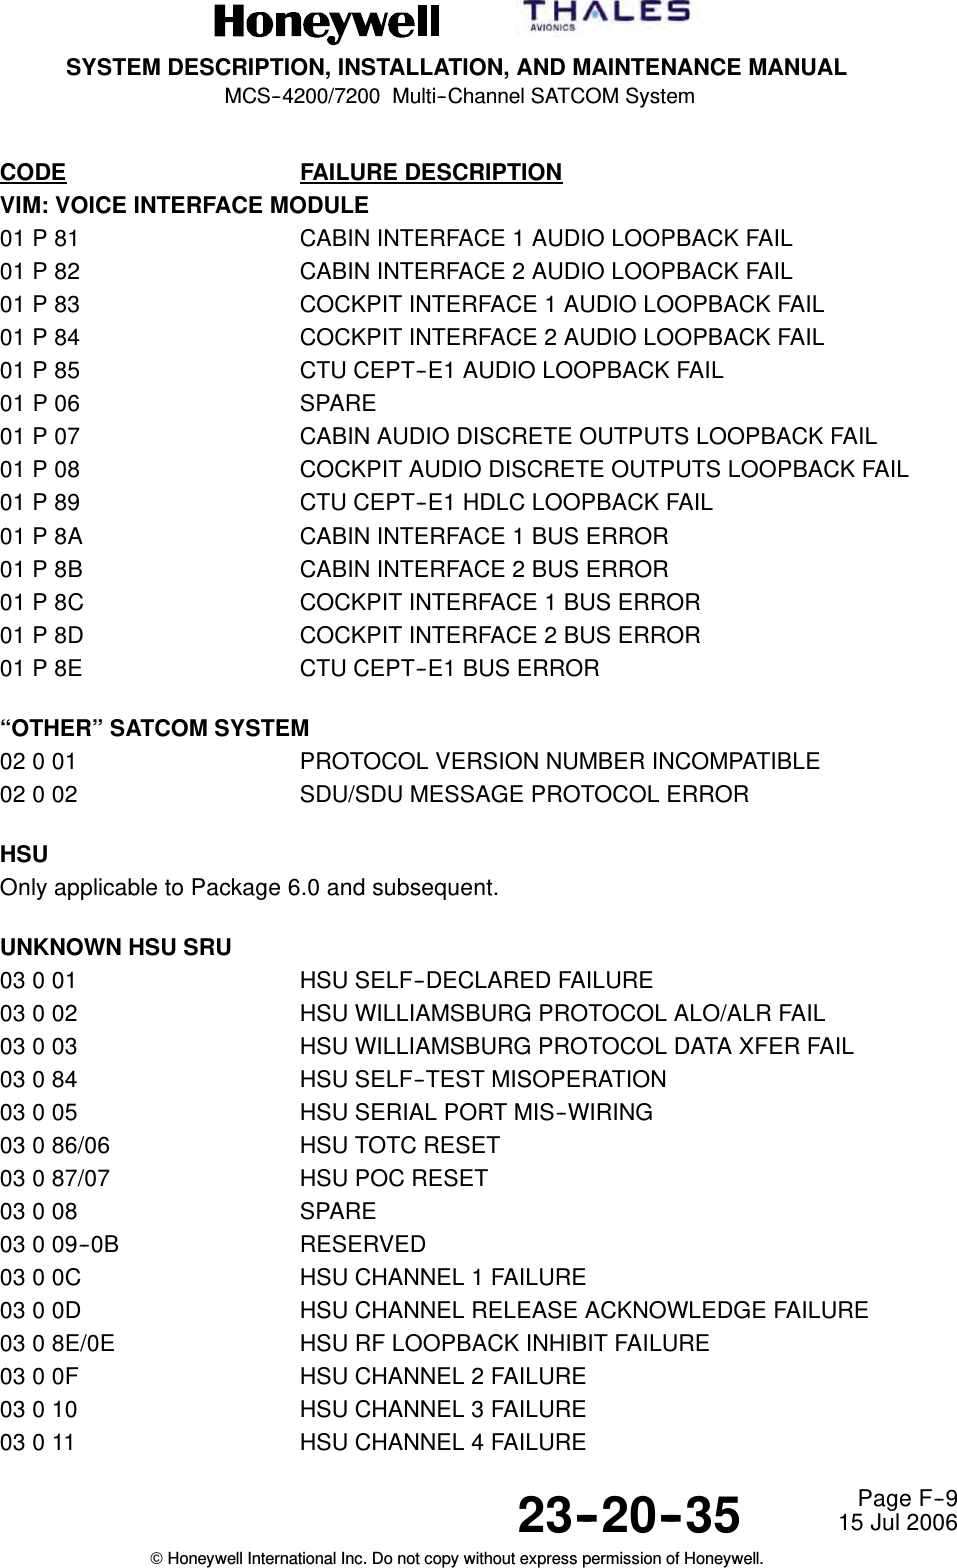 SYSTEM DESCRIPTION, INSTALLATION, AND MAINTENANCE MANUALMCS--4200/7200 Multi--Channel SATCOM System23--20--35 15 Jul 2006Honeywell International Inc. Do not copy without express permission of Honeywell.Page F--9CODE FAILURE DESCRIPTIONVIM: VOICE INTERFACE MODULE01 P 81 CABIN INTERFACE 1 AUDIO LOOPBACK FAIL01 P 82 CABIN INTERFACE 2 AUDIO LOOPBACK FAIL01 P 83 COCKPIT INTERFACE 1 AUDIO LOOPBACK FAIL01 P 84 COCKPIT INTERFACE 2 AUDIO LOOPBACK FAIL01 P 85 CTU CEPT--E1 AUDIO LOOPBACK FAIL01 P 06 SPARE01 P 07 CABIN AUDIO DISCRETE OUTPUTS LOOPBACK FAIL01 P 08 COCKPIT AUDIO DISCRETE OUTPUTS LOOPBACK FAIL01 P 89 CTU CEPT--E1 HDLC LOOPBACK FAIL01 P 8A CABIN INTERFACE 1 BUS ERROR01 P 8B CABIN INTERFACE 2 BUS ERROR01 P 8C COCKPIT INTERFACE 1 BUS ERROR01 P 8D COCKPIT INTERFACE 2 BUS ERROR01 P 8E CTU CEPT--E1 BUS ERROR“OTHER” SATCOM SYSTEM02 0 01 PROTOCOL VERSION NUMBER INCOMPATIBLE02 0 02 SDU/SDU MESSAGE PROTOCOL ERRORHSUOnly applicable to Package 6.0 and subsequent.UNKNOWN HSU SRU03 0 01 HSU SELF--DECLARED FAILURE03 0 02 HSU WILLIAMSBURG PROTOCOL ALO/ALR FAIL03 0 03 HSU WILLIAMSBURG PROTOCOL DATA XFER FAIL03 0 84 HSU SELF--TEST MISOPERATION03 0 05 HSU SERIAL PORT MIS--WIRING03 0 86/06 HSU TOTC RESET03 0 87/07 HSU POC RESET03008 SPARE03 0 09--0B RESERVED03 0 0C HSU CHANNEL 1 FAILURE03 0 0D HSU CHANNEL RELEASE ACKNOWLEDGE FAILURE03 0 8E/0E HSU RF LOOPBACK INHIBIT FAILURE03 0 0F HSU CHANNEL 2 FAILURE03 0 10 HSU CHANNEL 3 FAILURE03 0 11 HSU CHANNEL 4 FAILURE